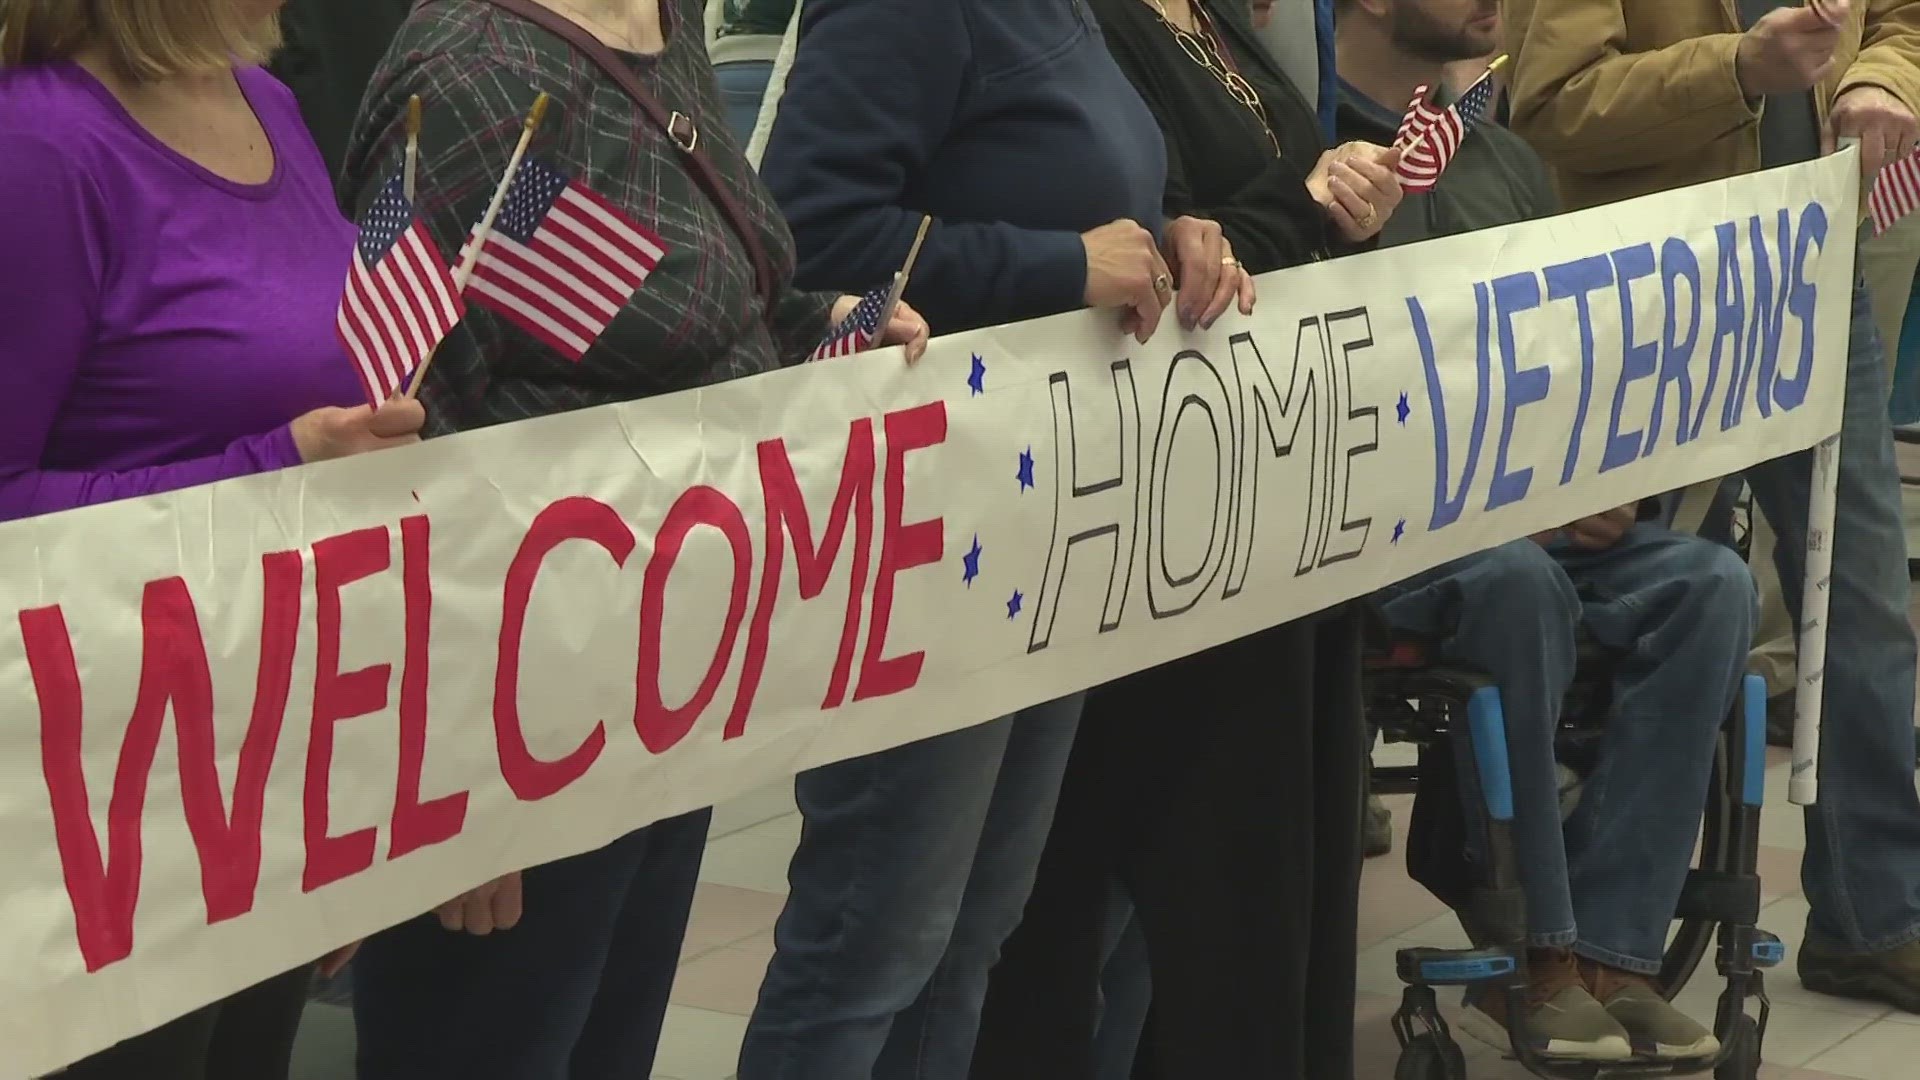 Veterans were welcomed home at the Portland Jetport Sunday.